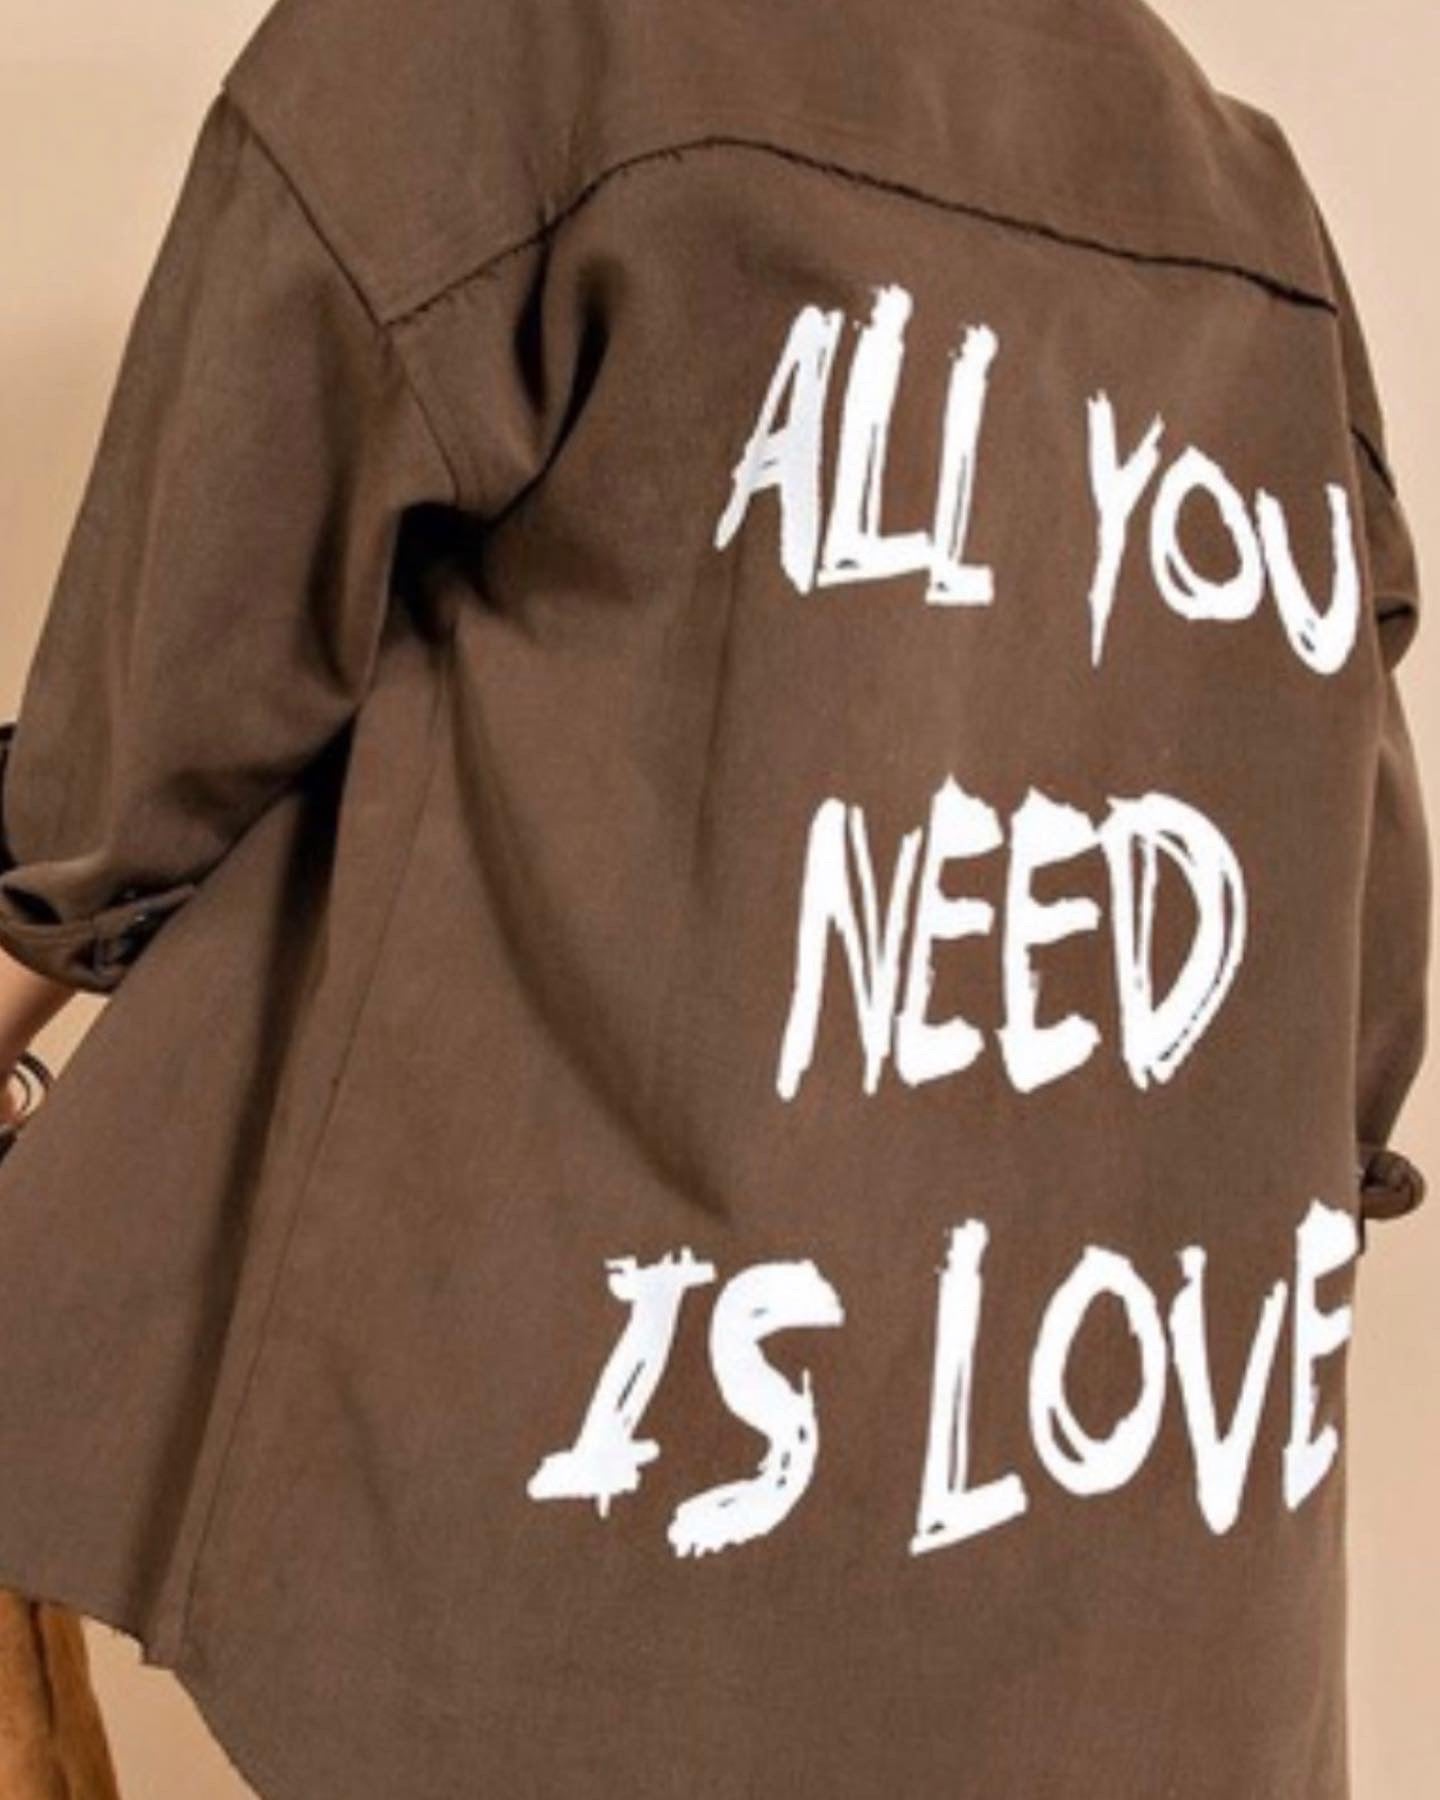 All you need is love shacket